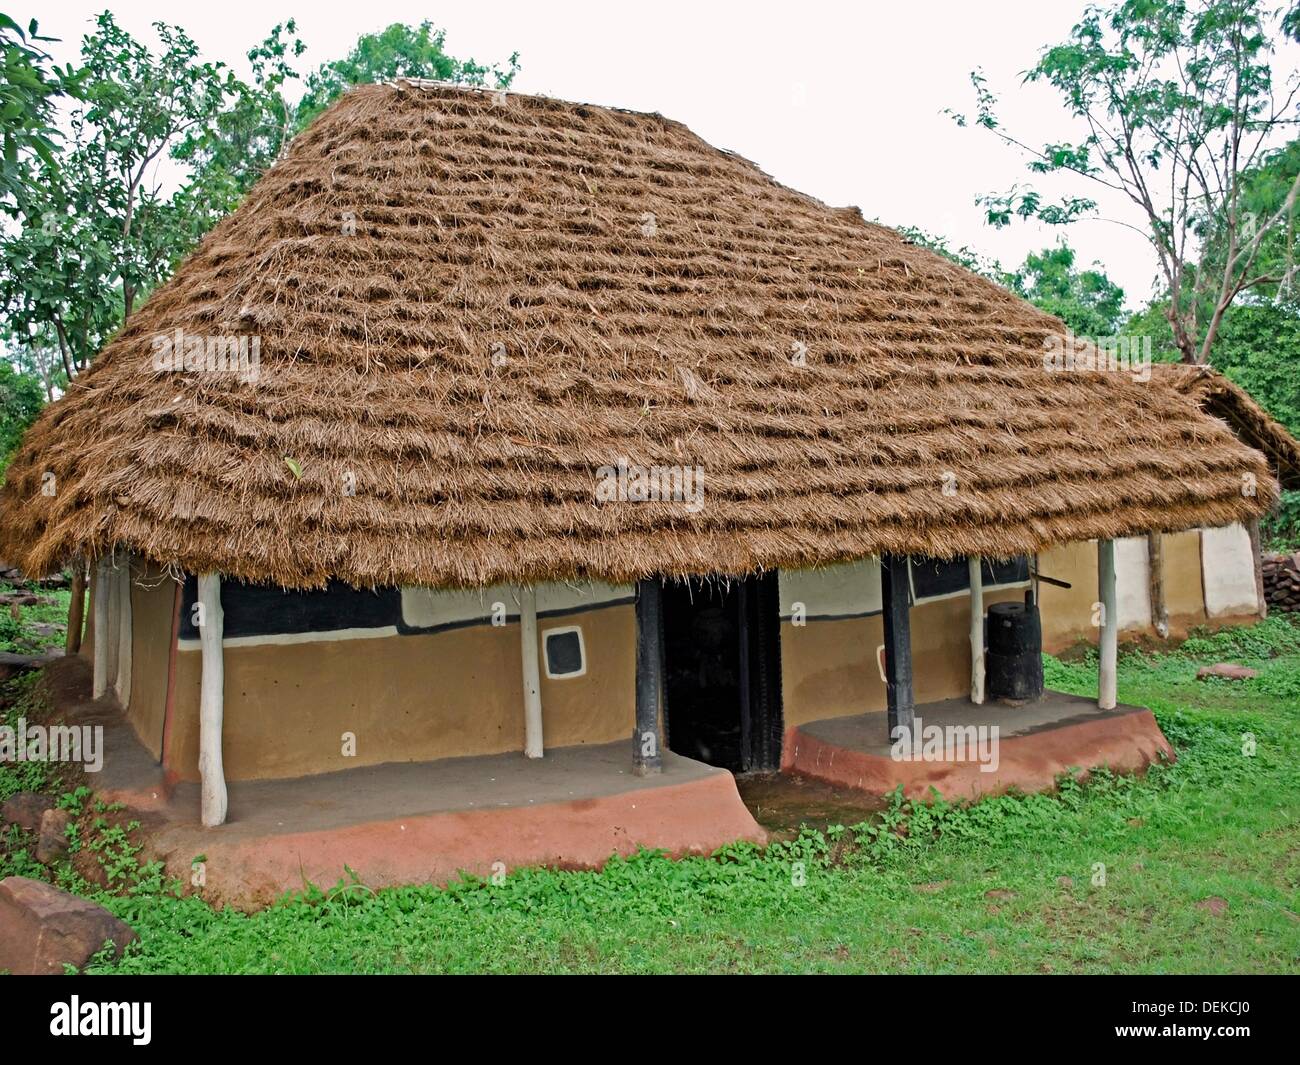 House of Gadsbaa agriculturists, Tribal hut, India Stock Photo